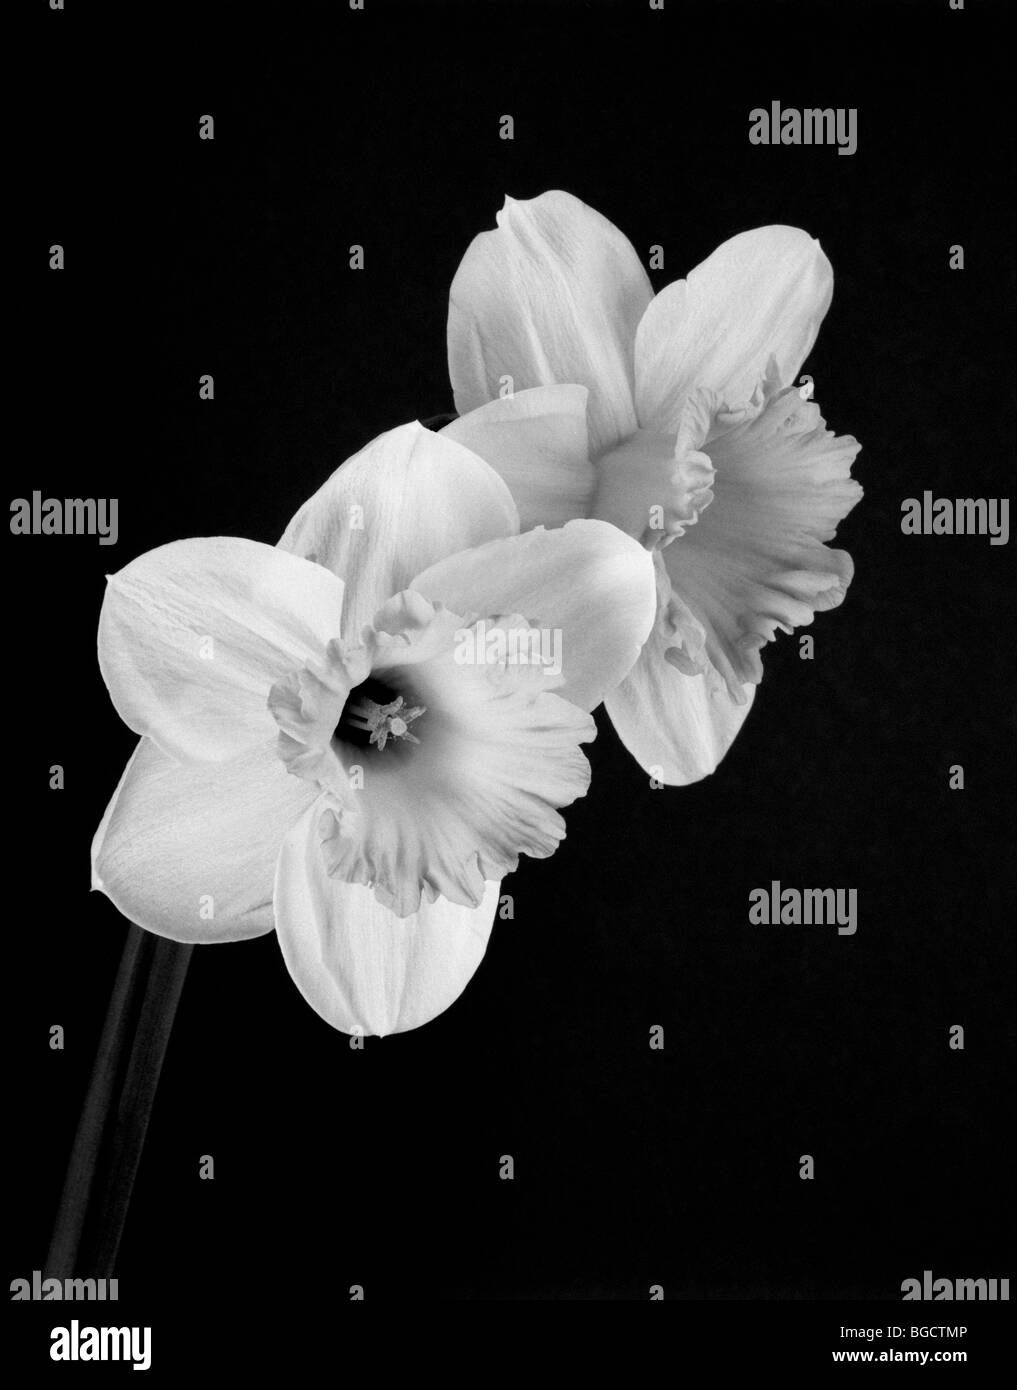 Washington - Daffodil flowers in black and white. Stock Photo